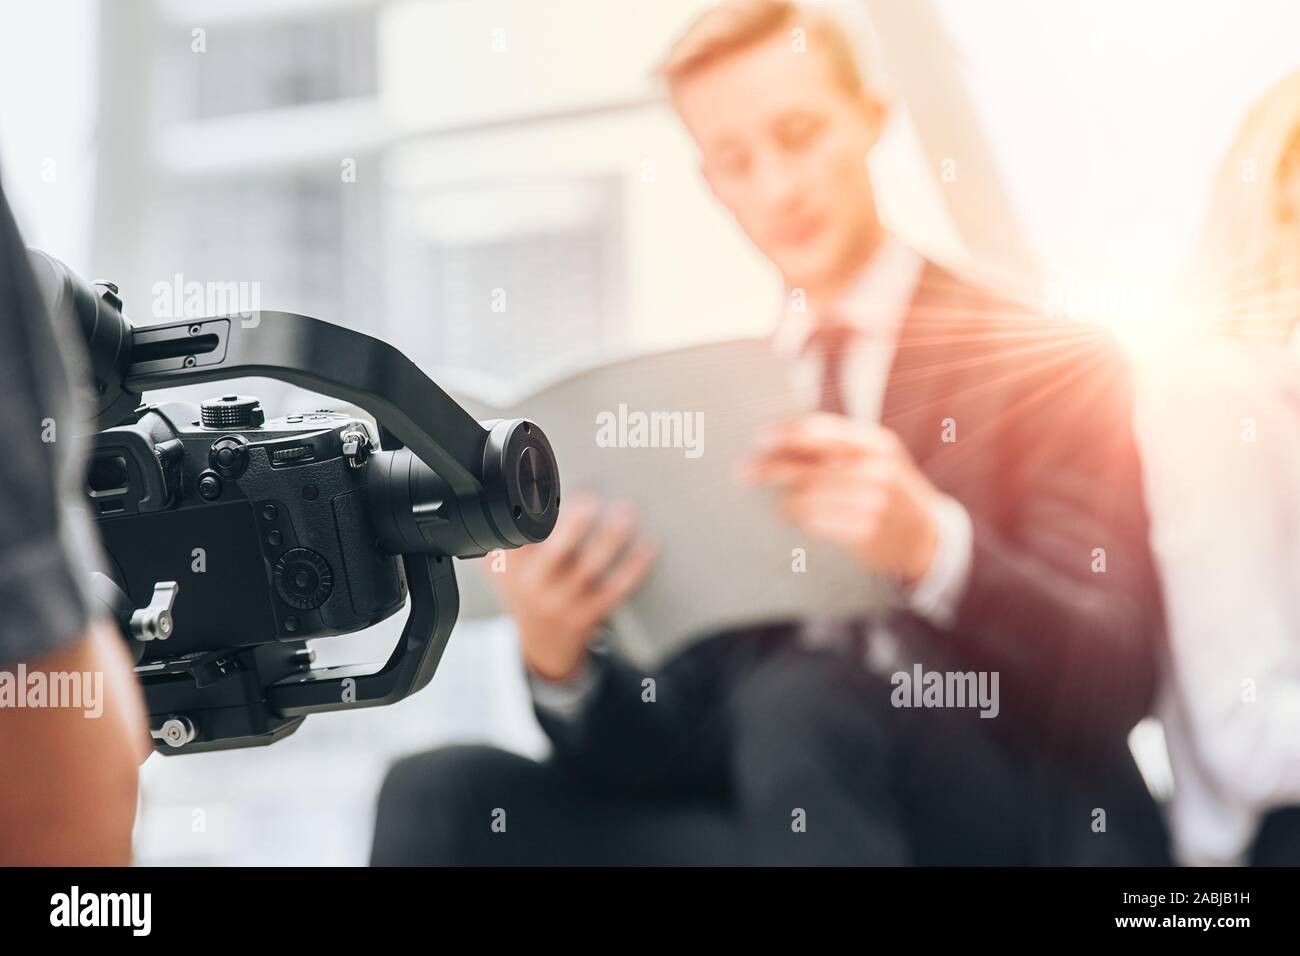 Videographer professional shooting record video usign gimbal camera stabilizer for anti shake device technology in businessman scene. Stock Photo